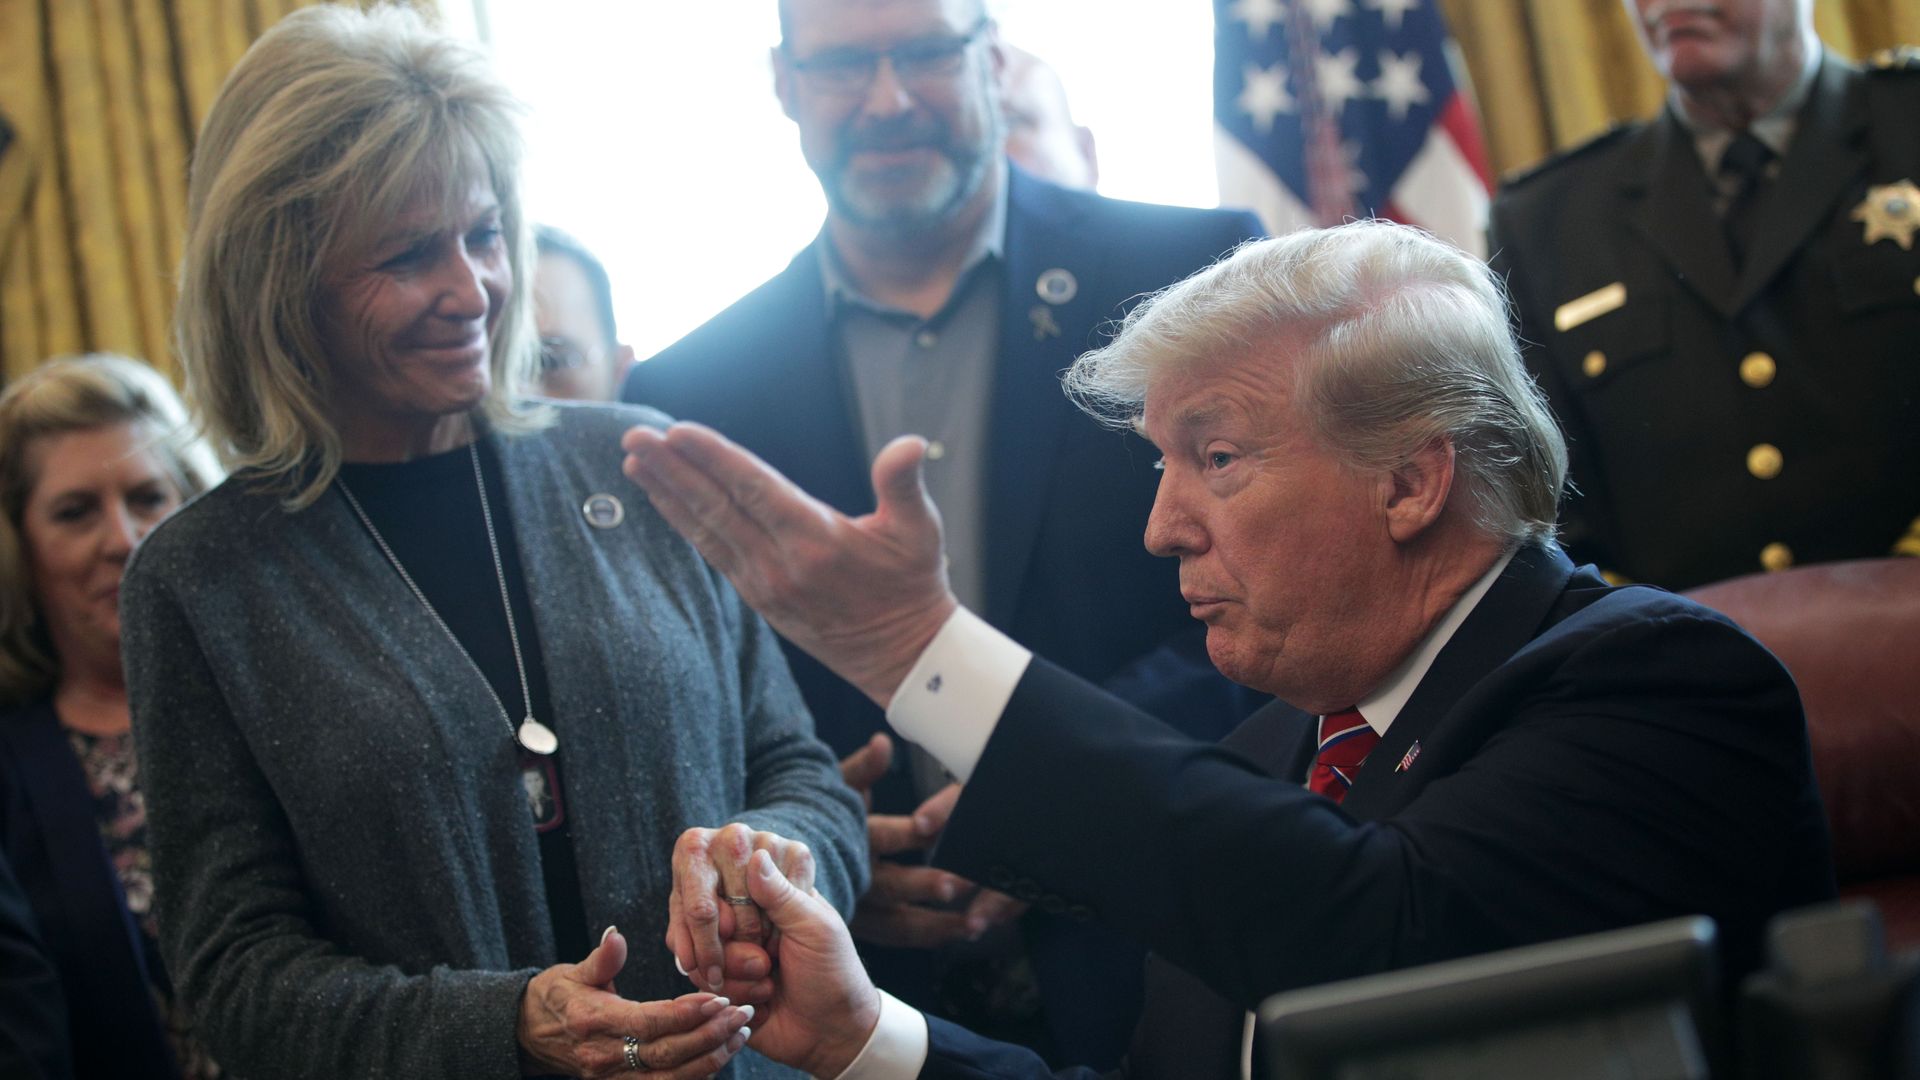 Mary Ann Mendoza with President Trump at the White House in 2019.